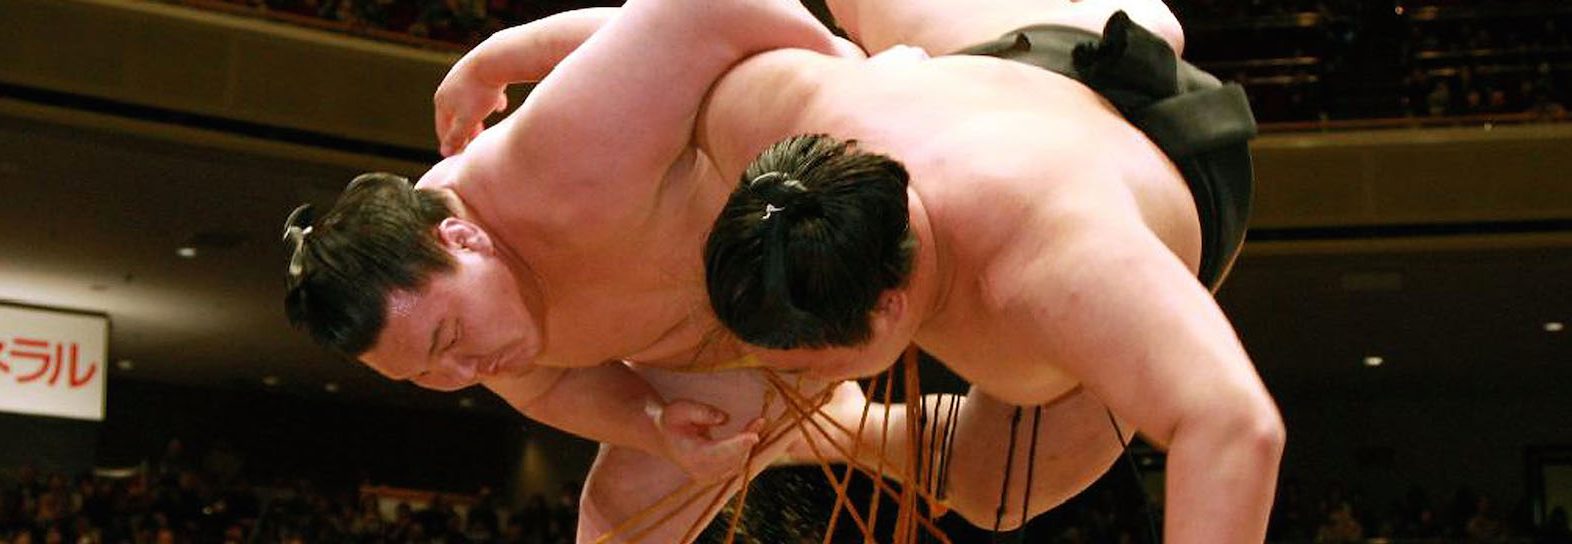 The Mongolian Hakuho (left), who has won more titles than any wrestler in sumo's history, throws his opponent on February 5, 2012 in Tokyo, Japan. (Getty)